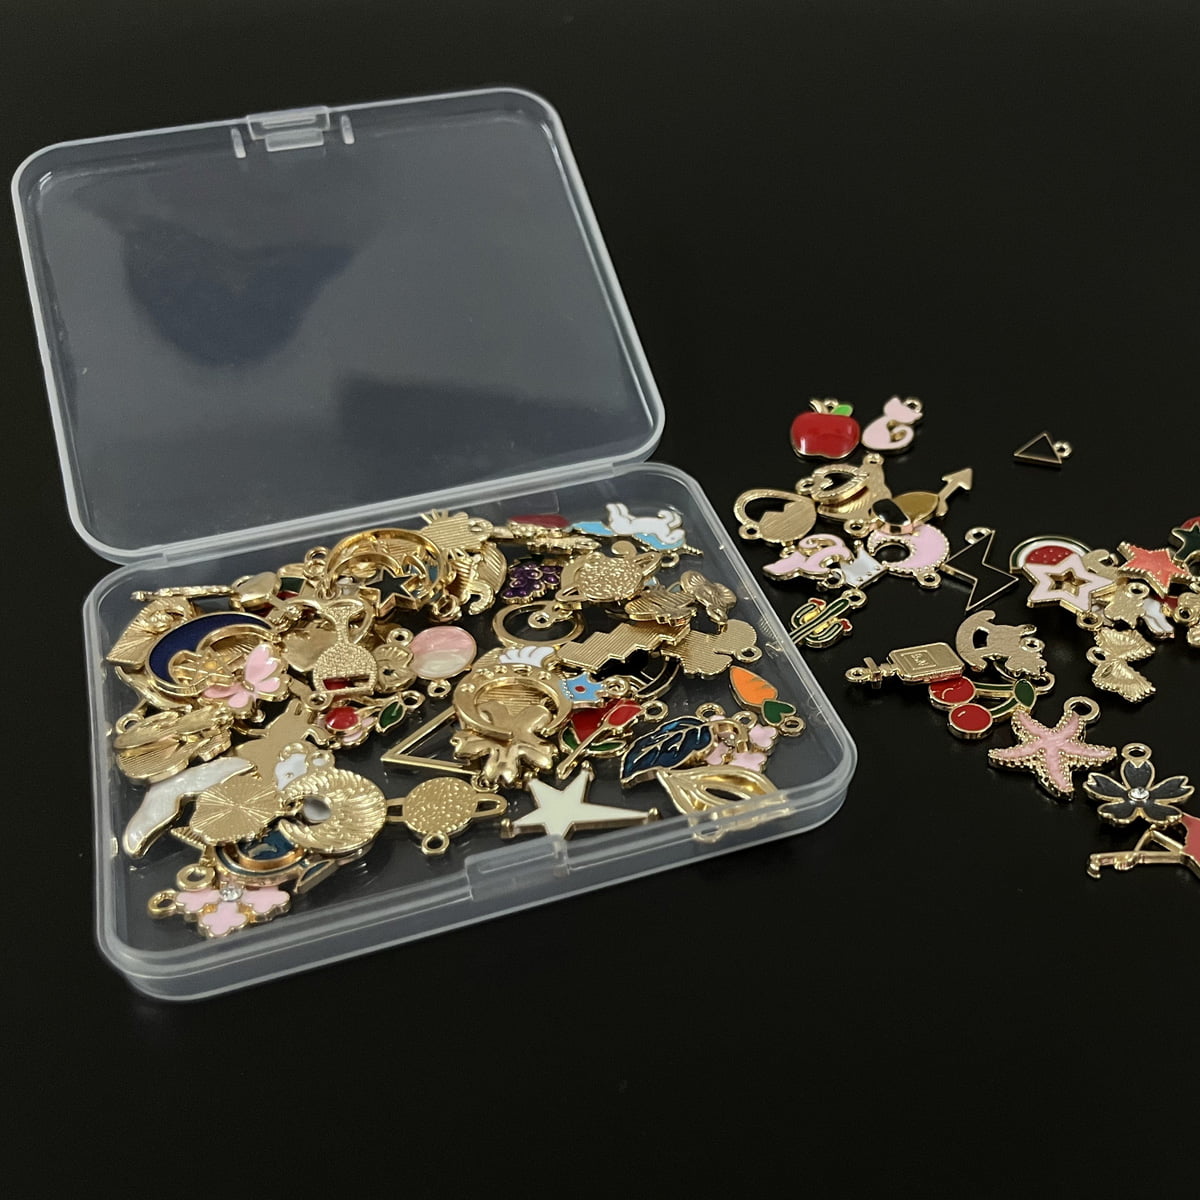 HANRU 100pcs Christmas Charms for Jewelry Making, Jewelry Charms kit, Bulk  Christmas Gold-Plated Enamel Charms for DIY Necklace Bracelet Earing Craft  Supplies 